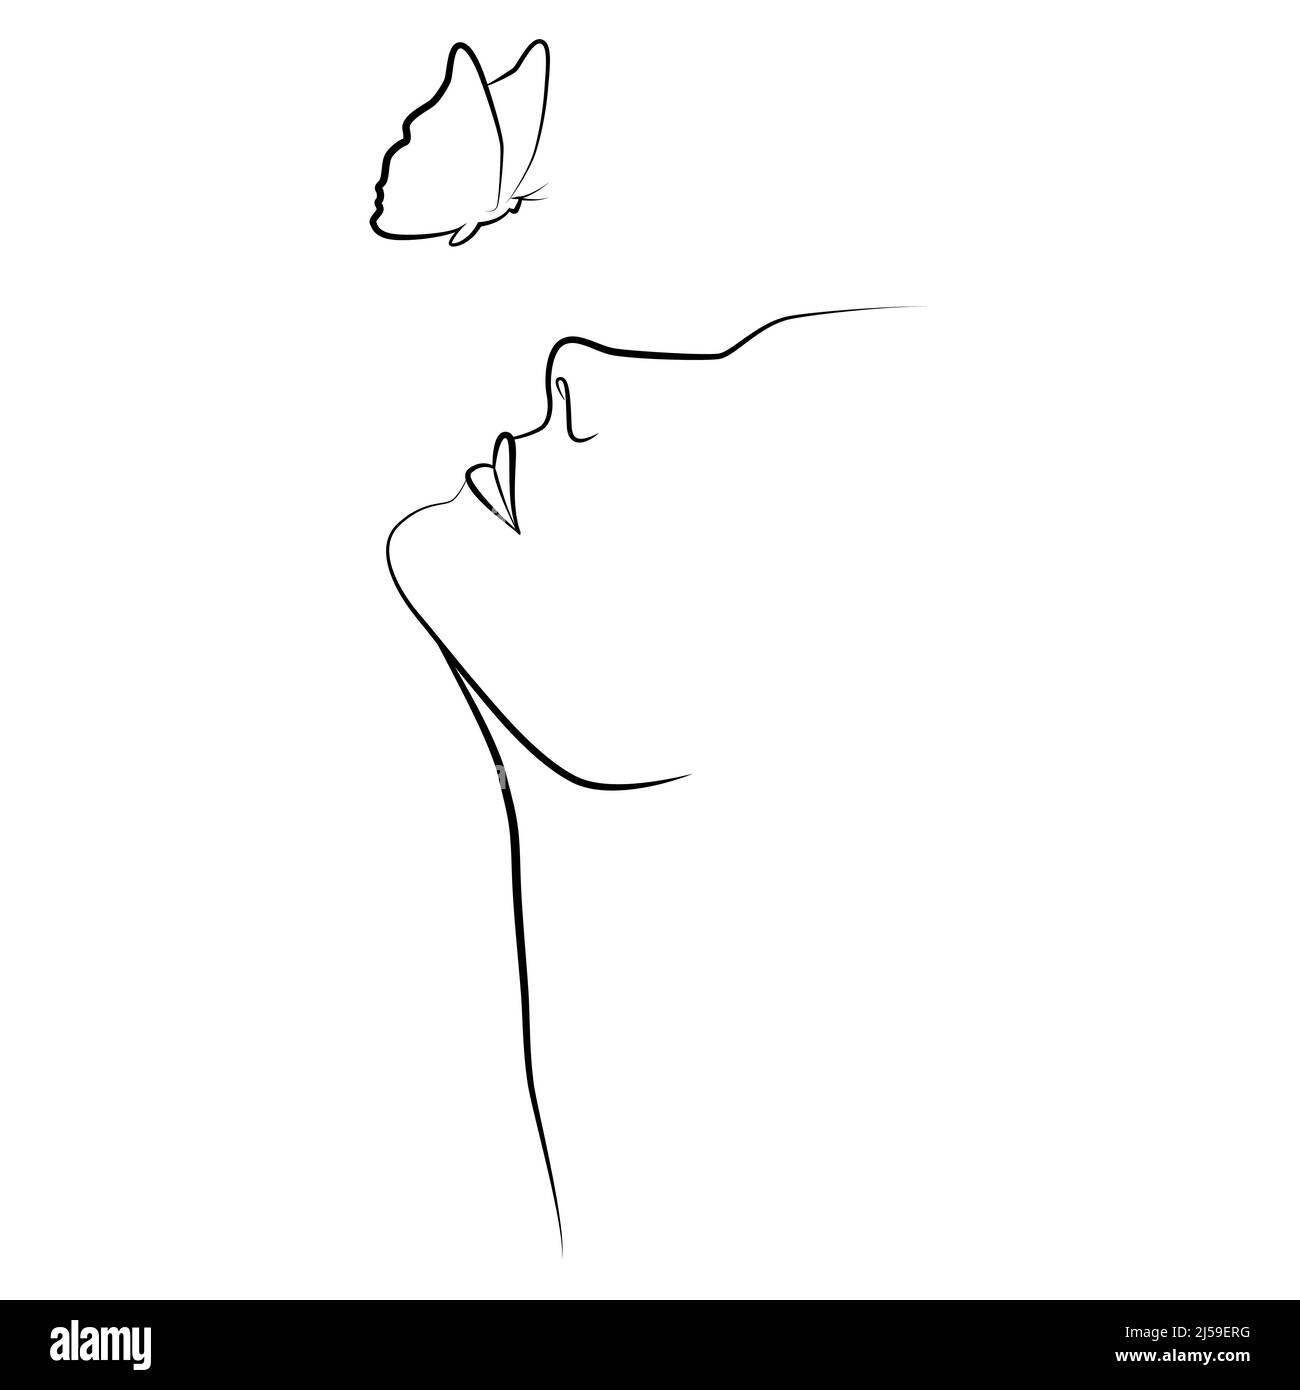 https://c8.alamy.com/comp/2J59ERG/abstract-face-with-a-butterfly-fashionable-print-minimalist-female-beauty-continuous-line-drawing-of-established-faces-and-hairstyles-fashion-con-2J59ERG.jpg